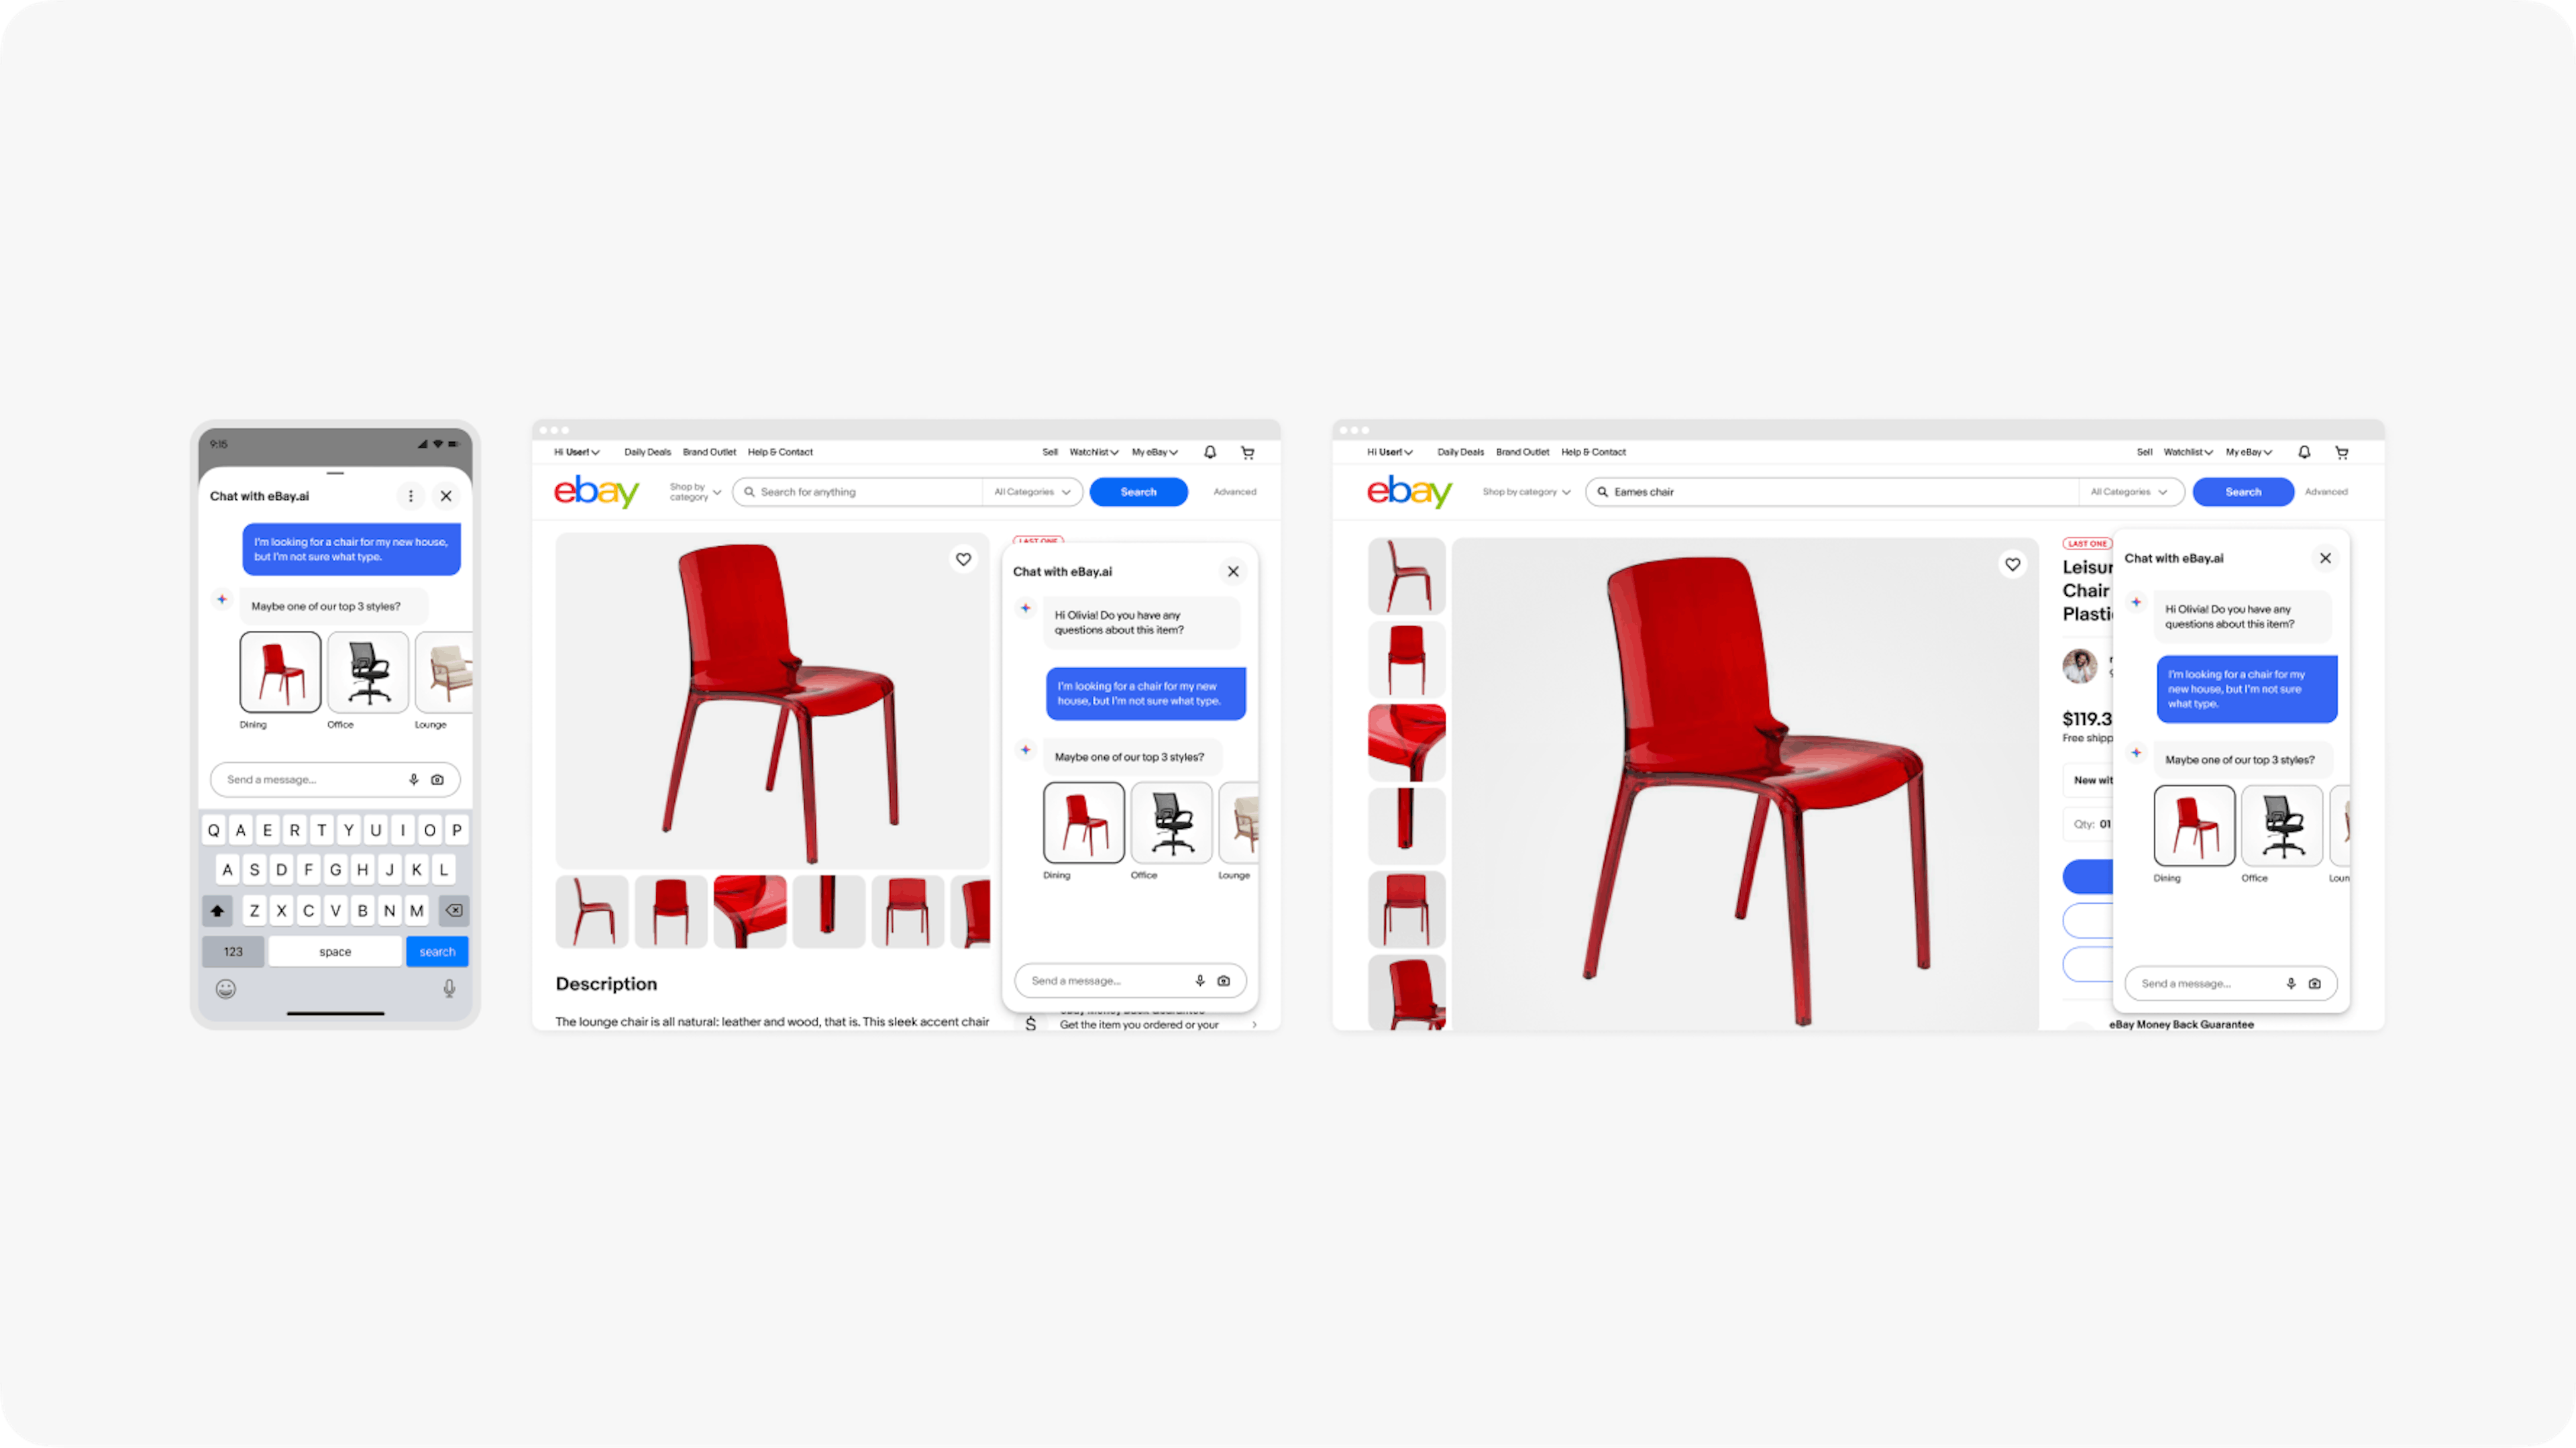 3 examples of how the AI shopping assistant window shows up on 3 different screen sizes. The first is full screen on mobile. The second is a side pane window floating in the bottom right corner of the screen on top of an item page on a medium sized browser screen. The third is a large browser screen where the window behaves the same. 